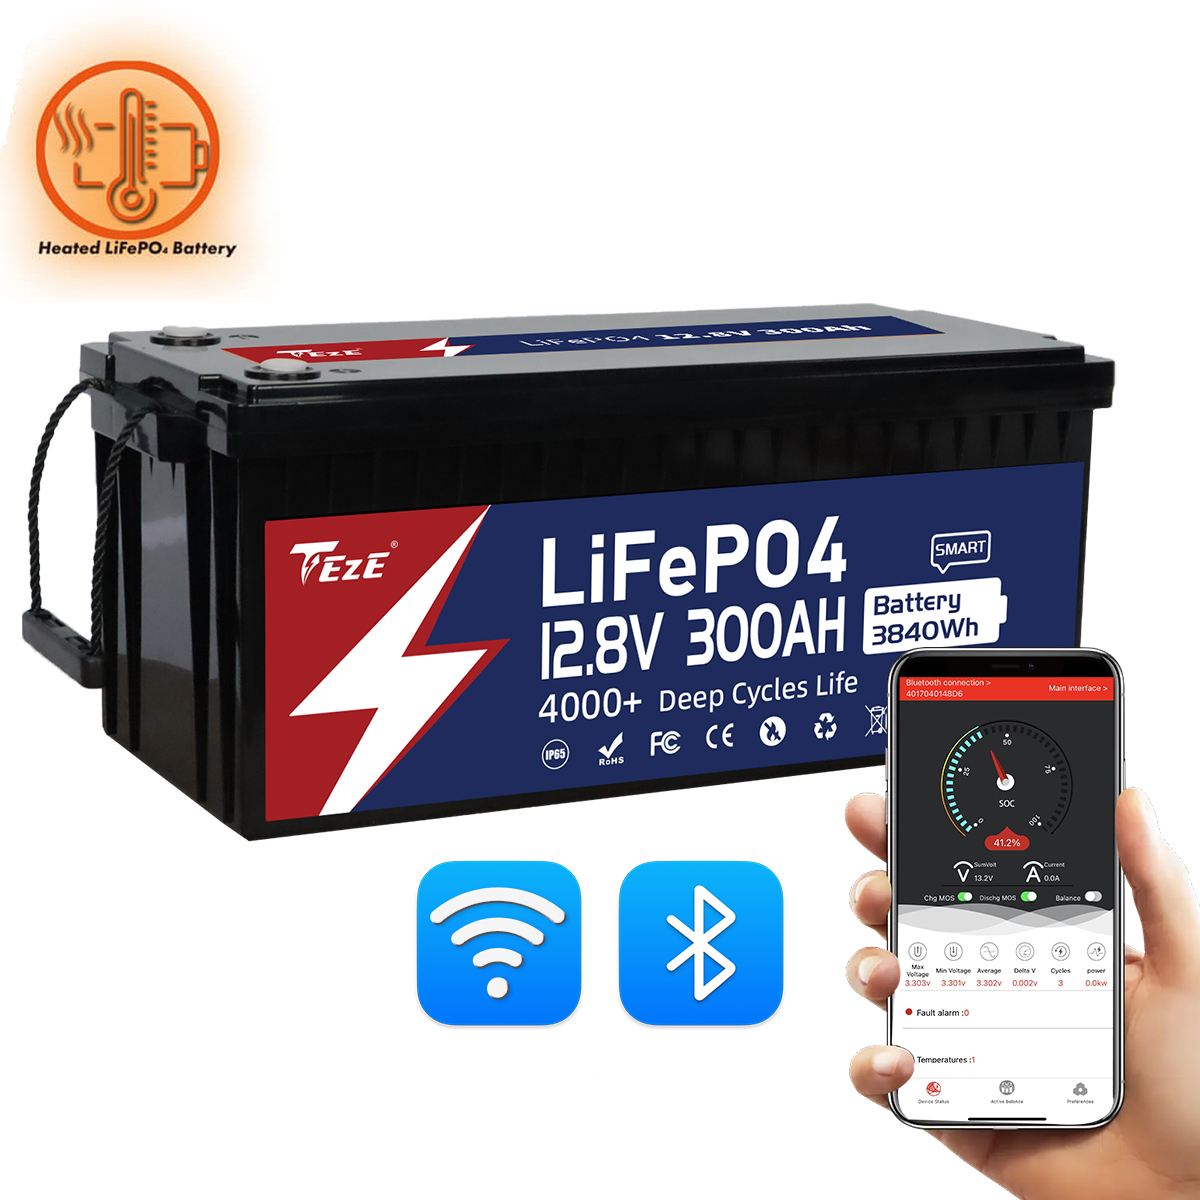 New Add WiFi-TezePower 12V 300Ah LiFePO4 Battery with WIFI and Bluetooth, Self-heating and Active Balancer, Built-in 200A Daly BMS(WIFI Built-in Version)